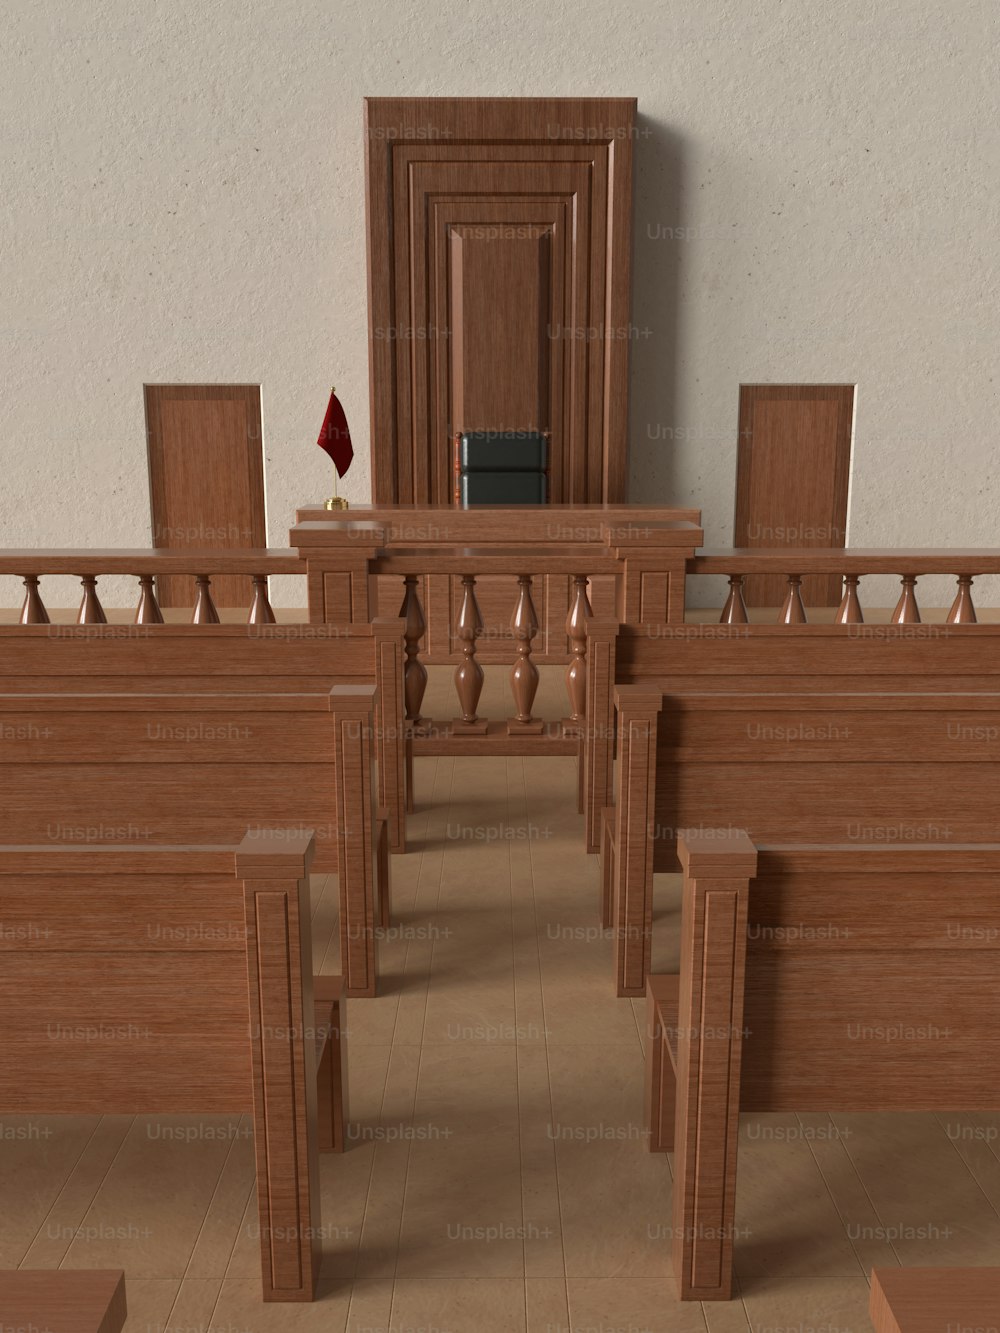 a computer generated image of a church pews